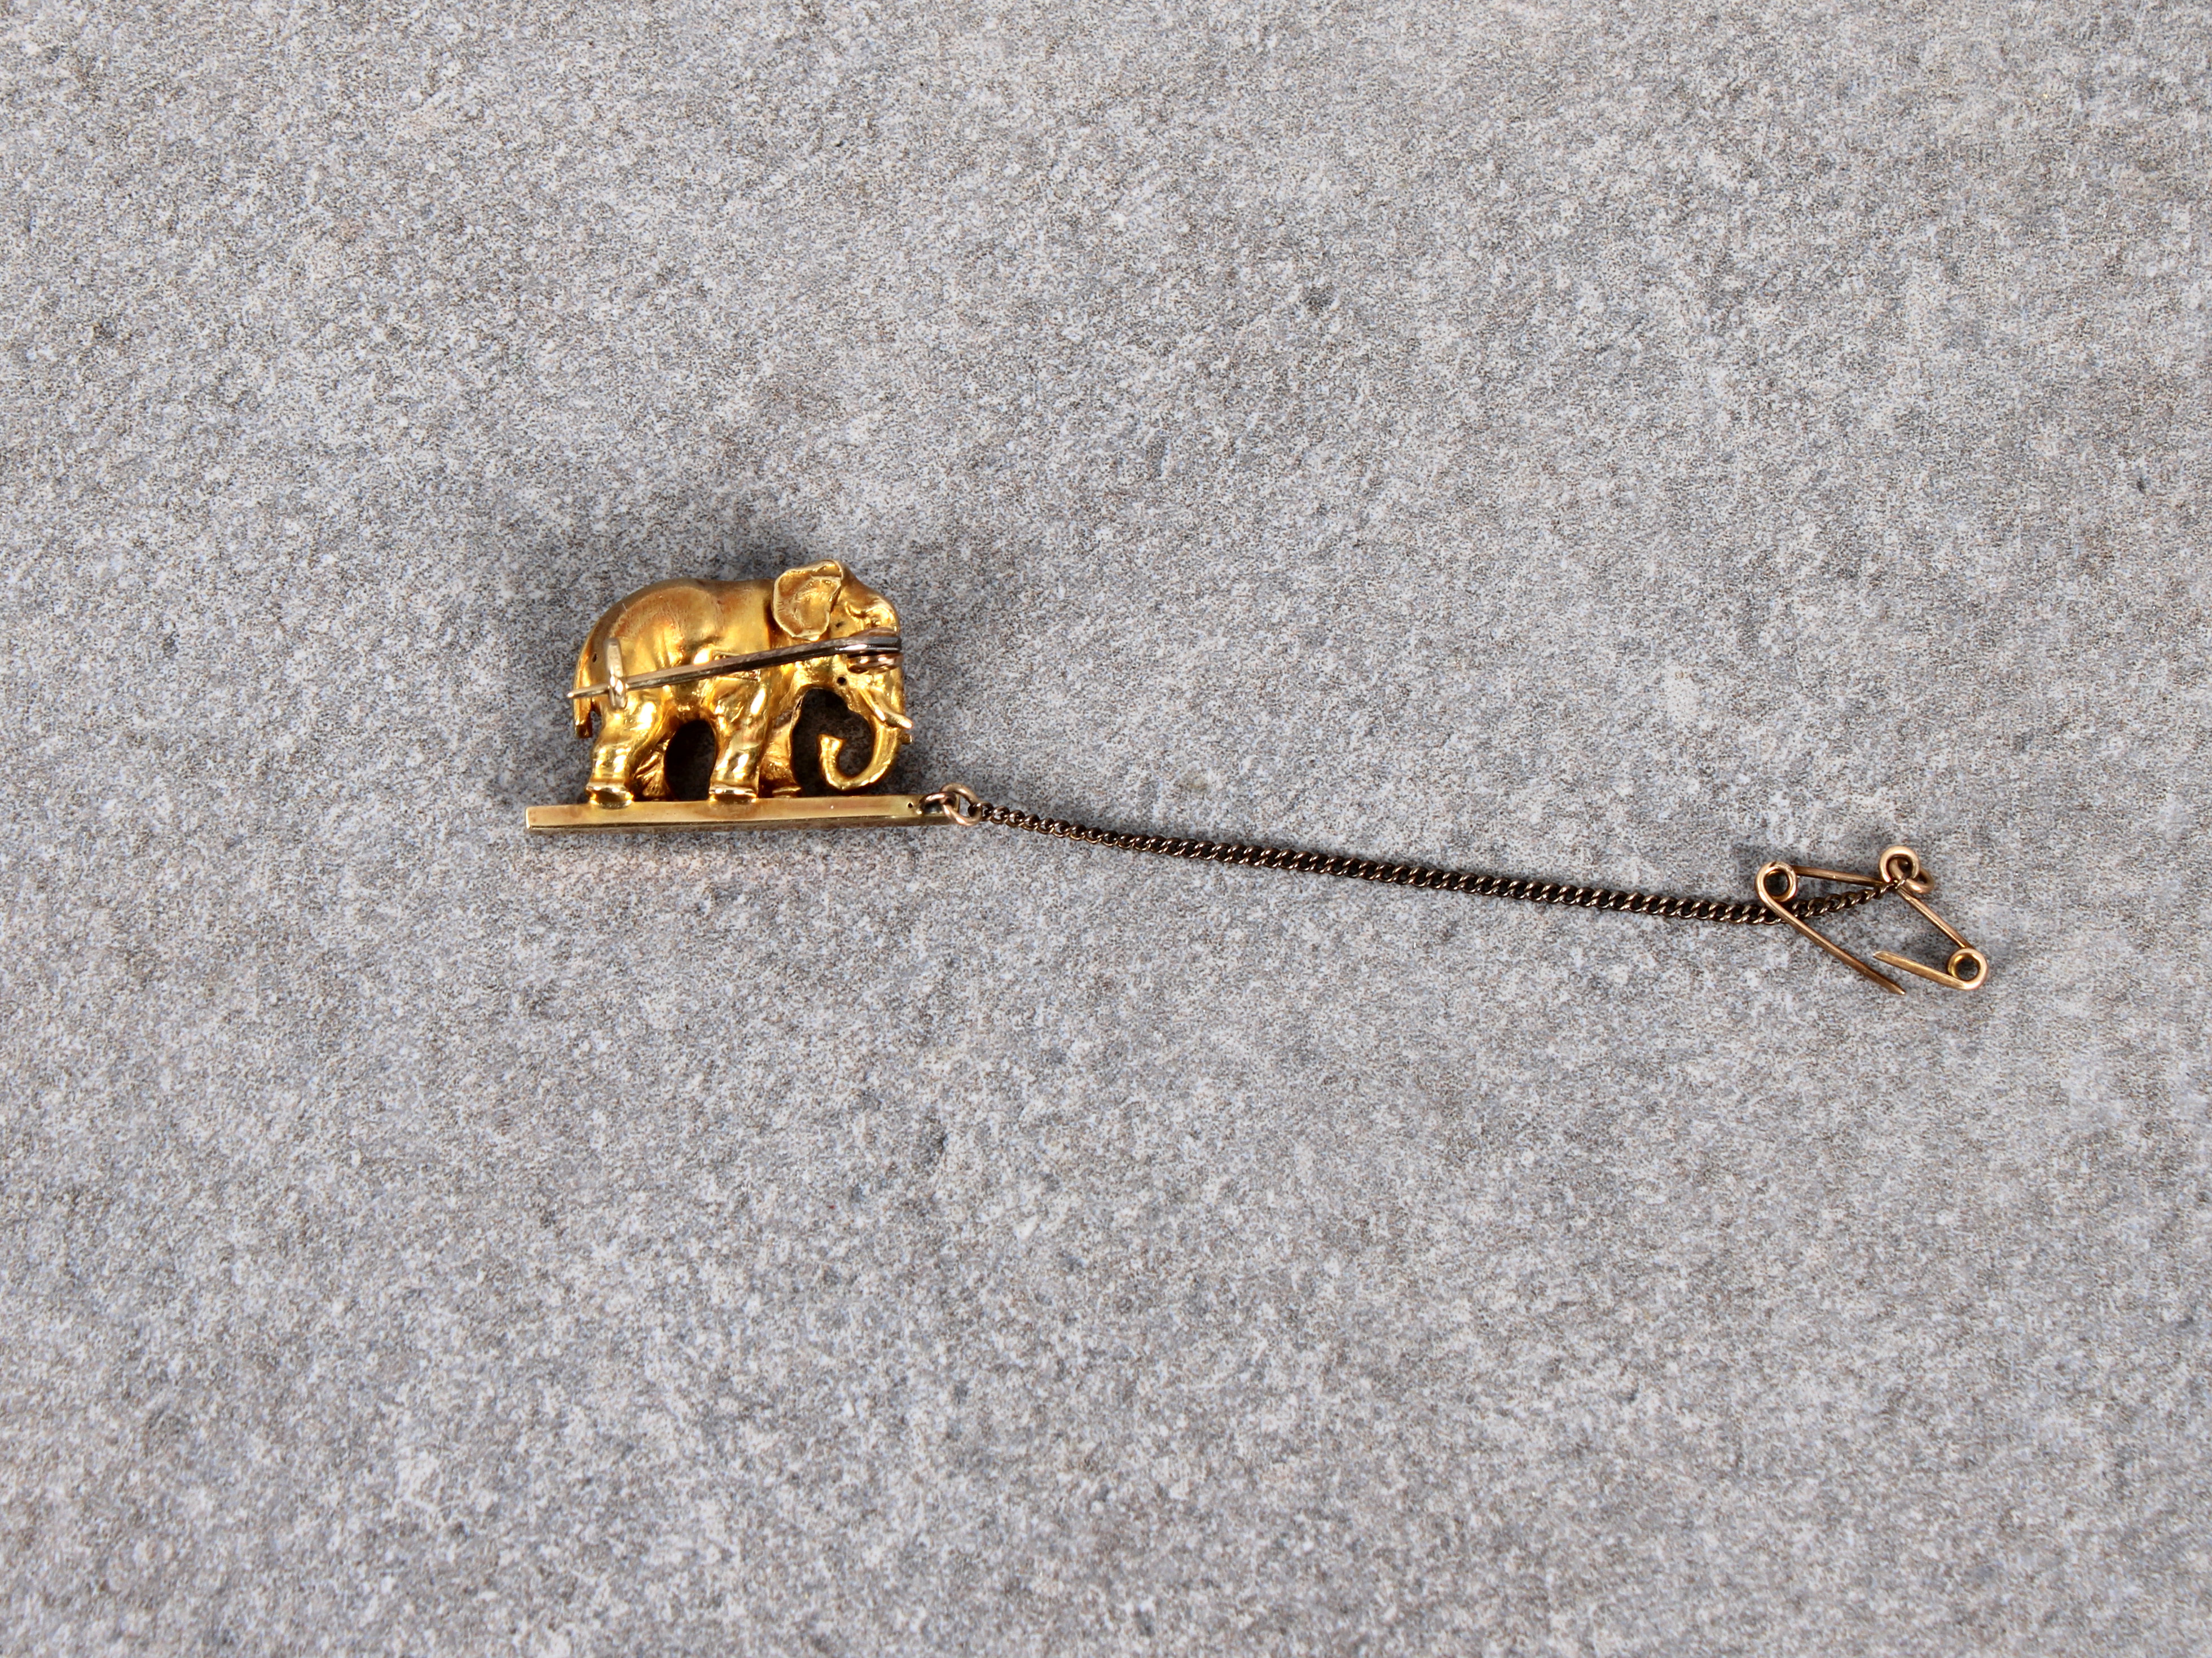 A novelty miniature 15ct yellow elephant brooch / pin - Image 2 of 2